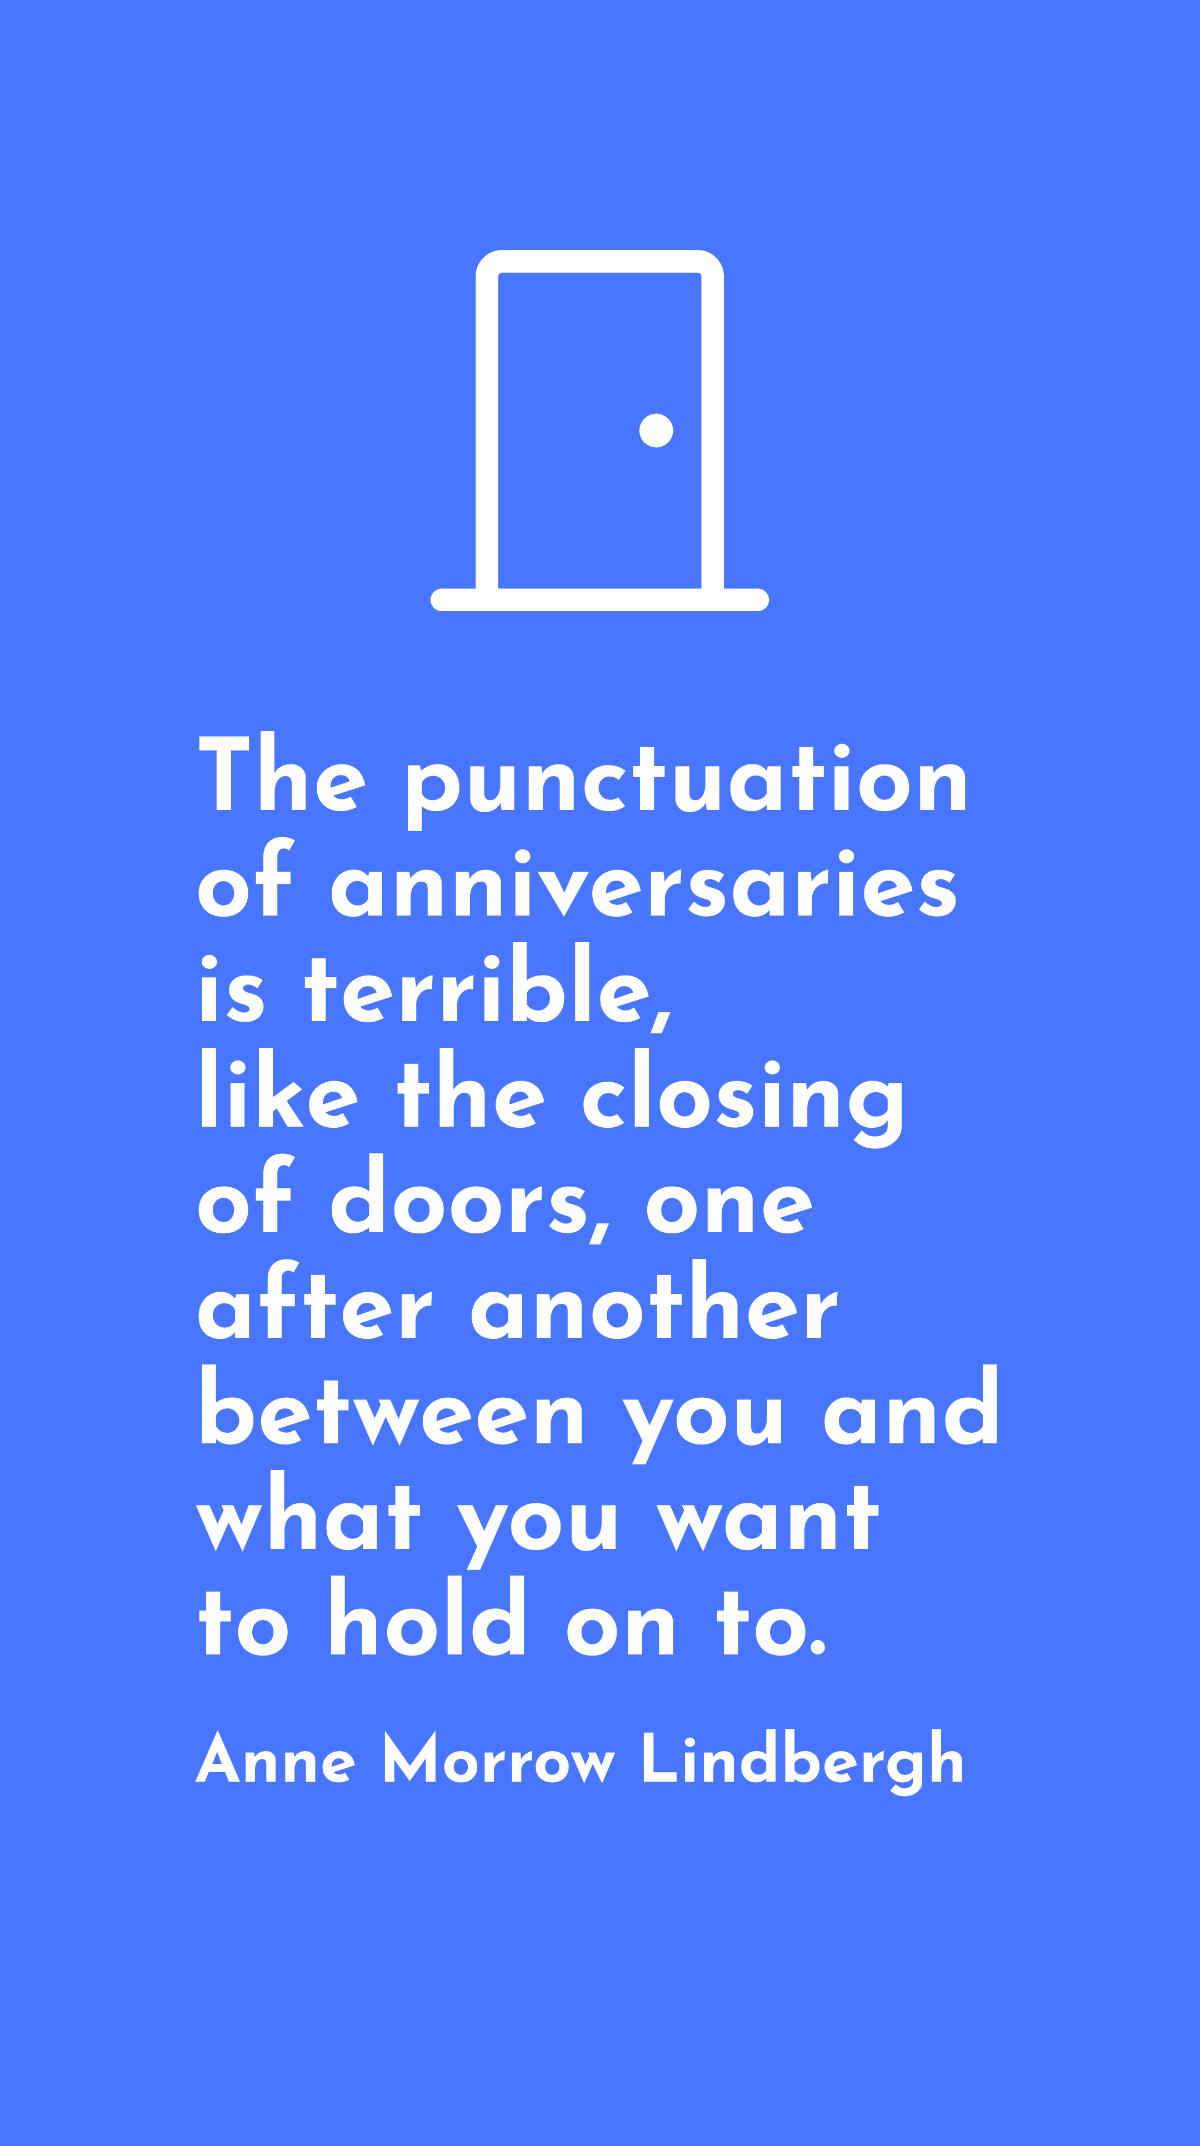 Anne Morrow Lindbergh - The punctuation of anniversaries is terrible, like the closing of doors, one after another between you and what you want to hold on to. Template